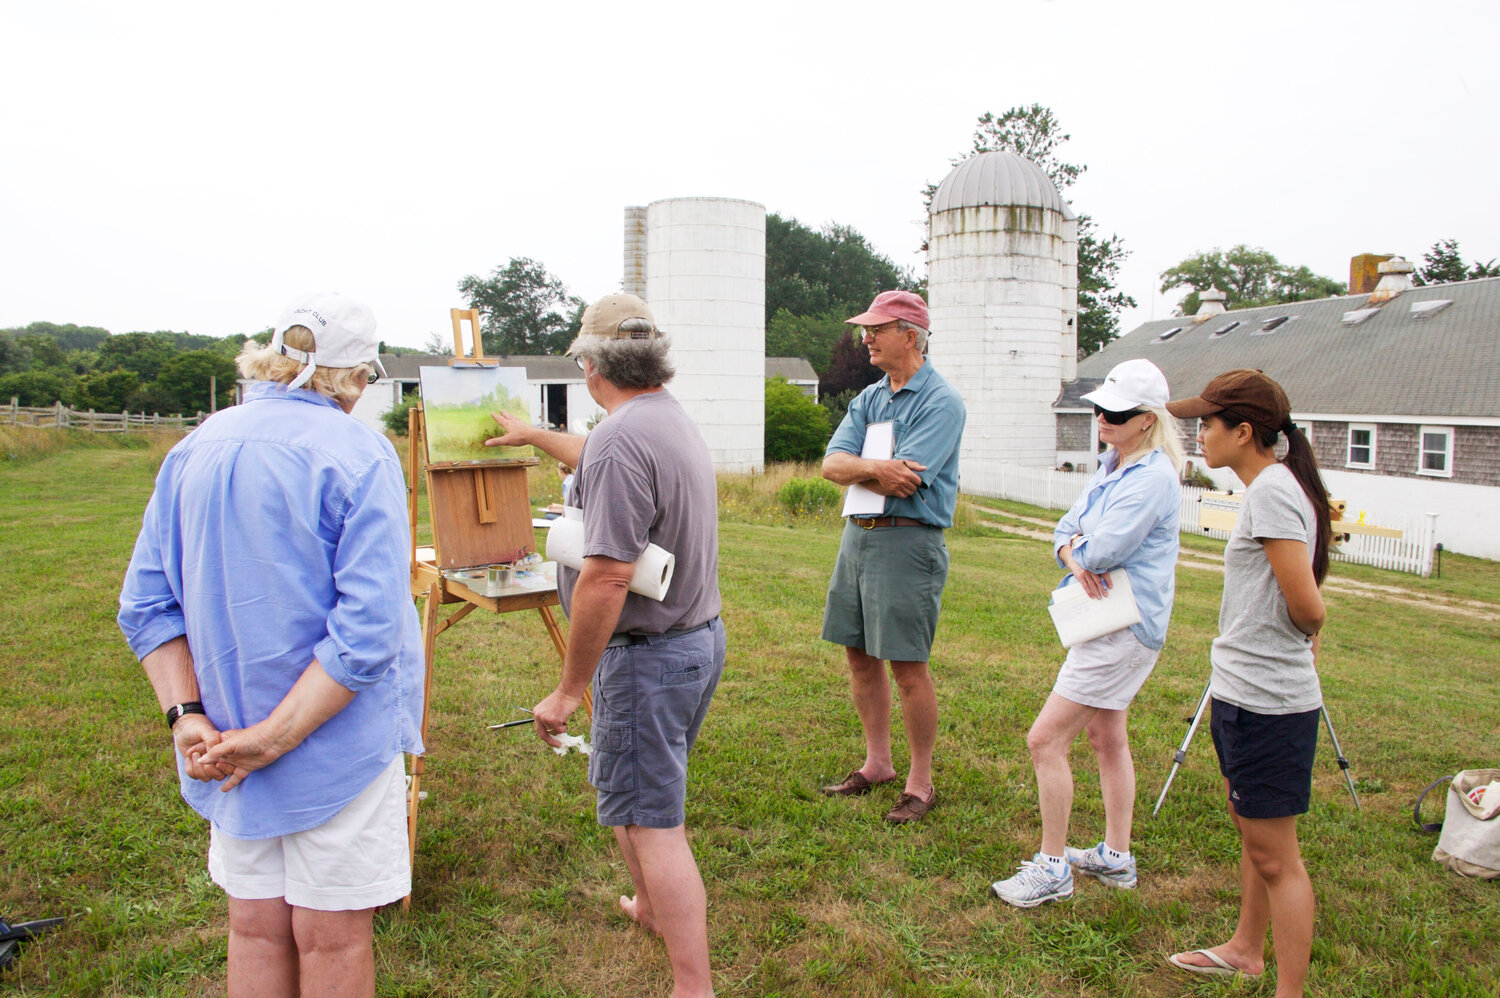 Nantucket Island School of Design and the Arts is resuming its full schedule of programming, including lectures, instruction and exhibitions, this summer after a four-year COVID-19-related hiatus.